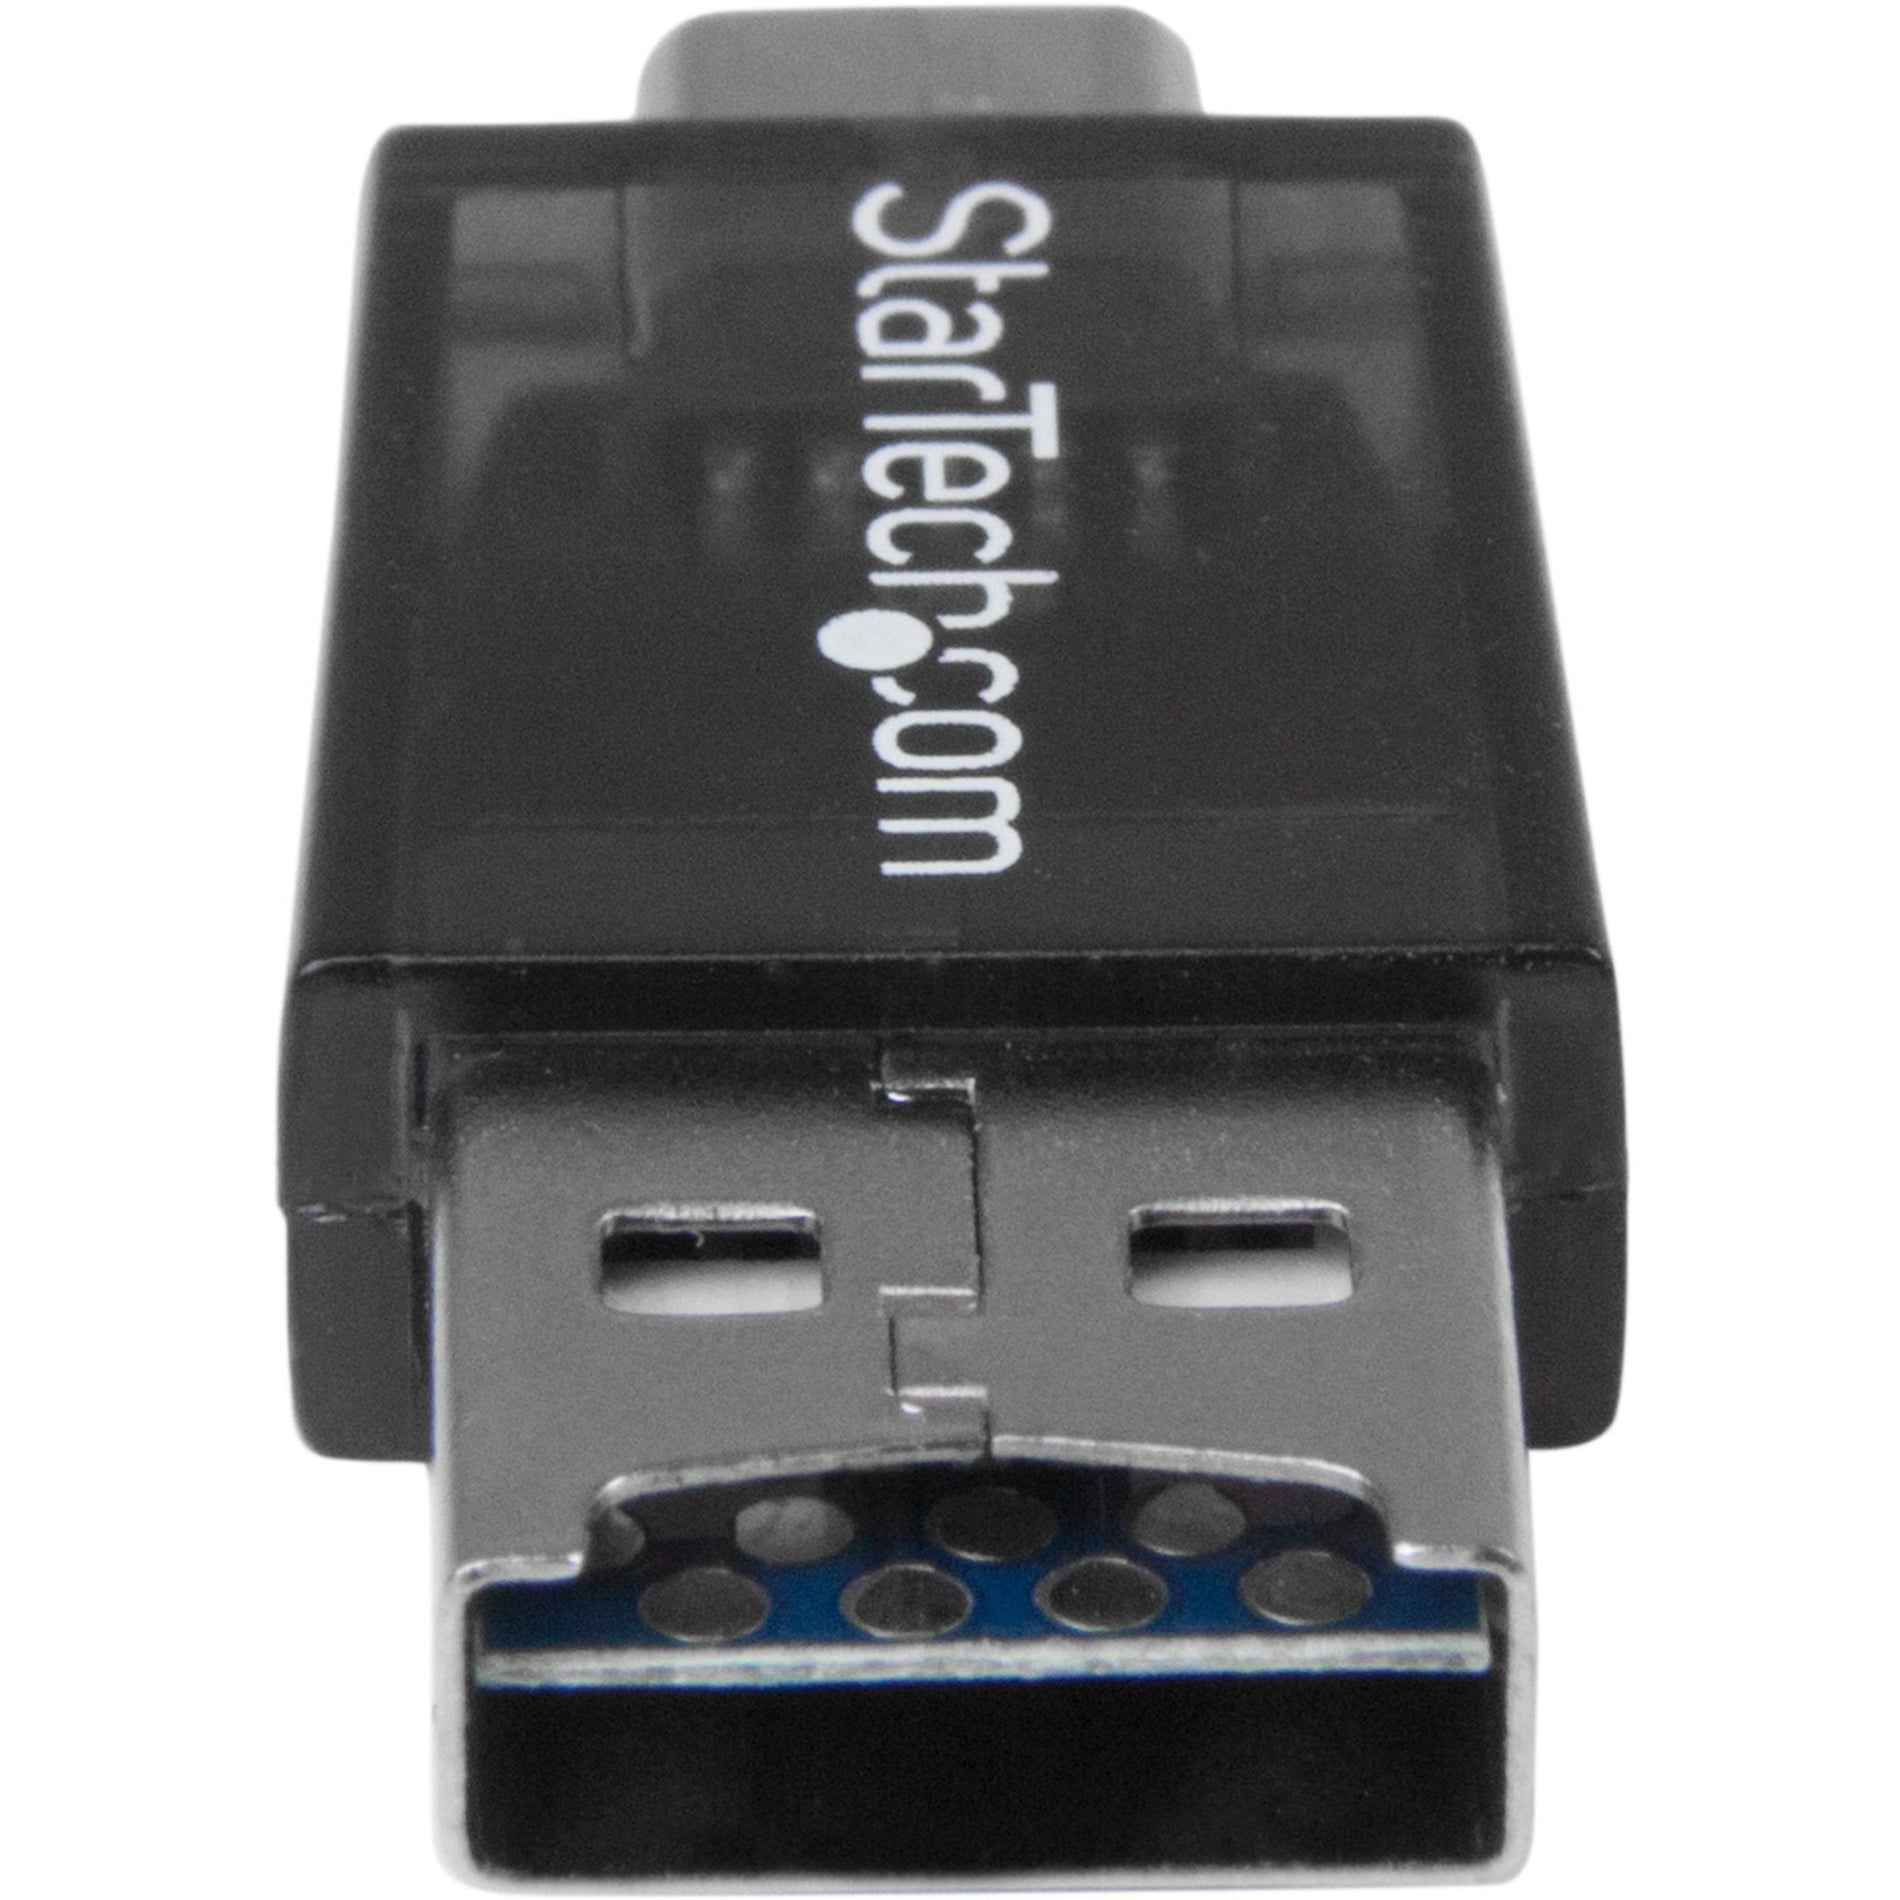 StarTech.com MSDREADU2OTG Micro SD to Micro USB / USB OTG Adapter Card Reader For Android Devices, Lightweight, USB 2.0, Micro USB